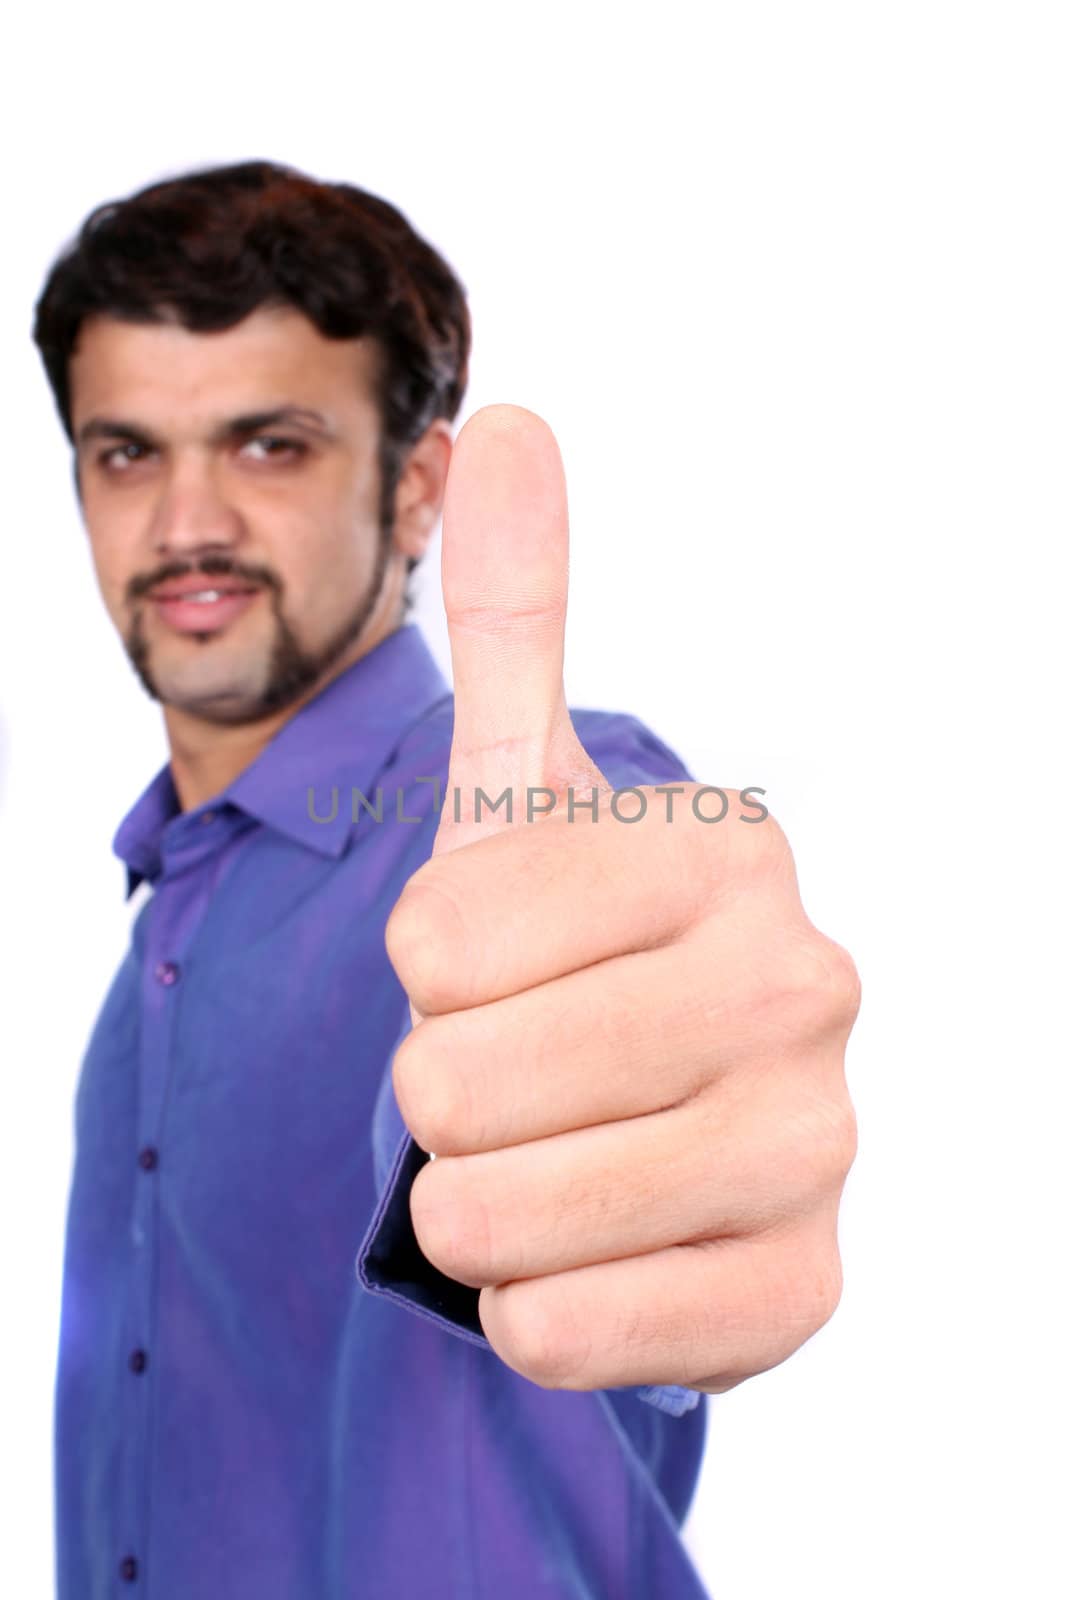 An Indian guy wishing good luck with a thumbs up sign, on white studio background. Focus on hand.